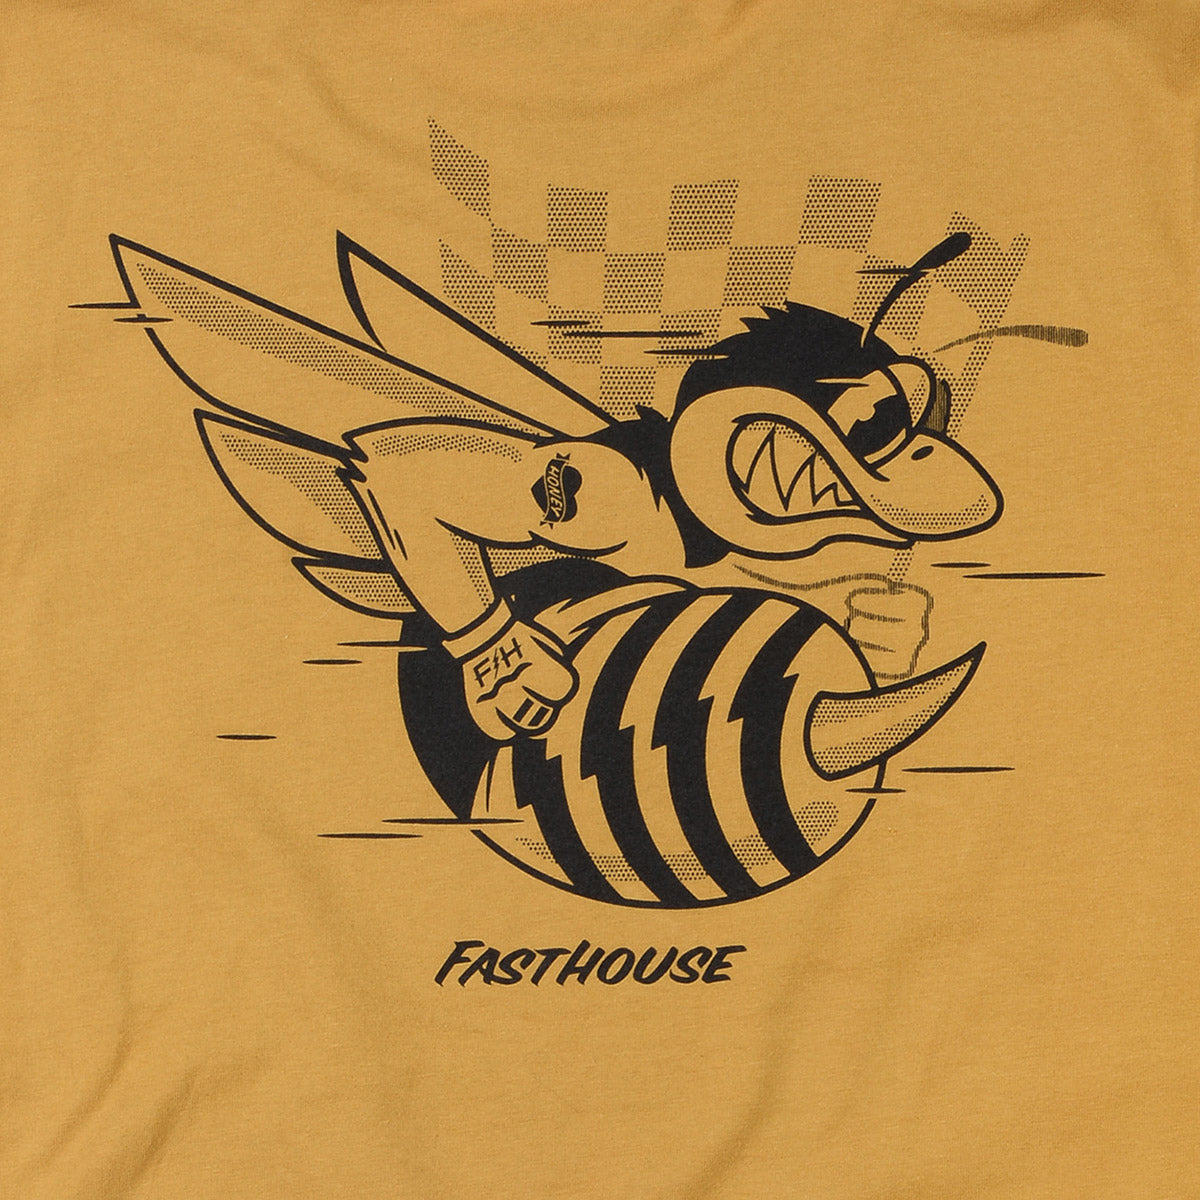 Swarm Youth Tee - Vintage Gold